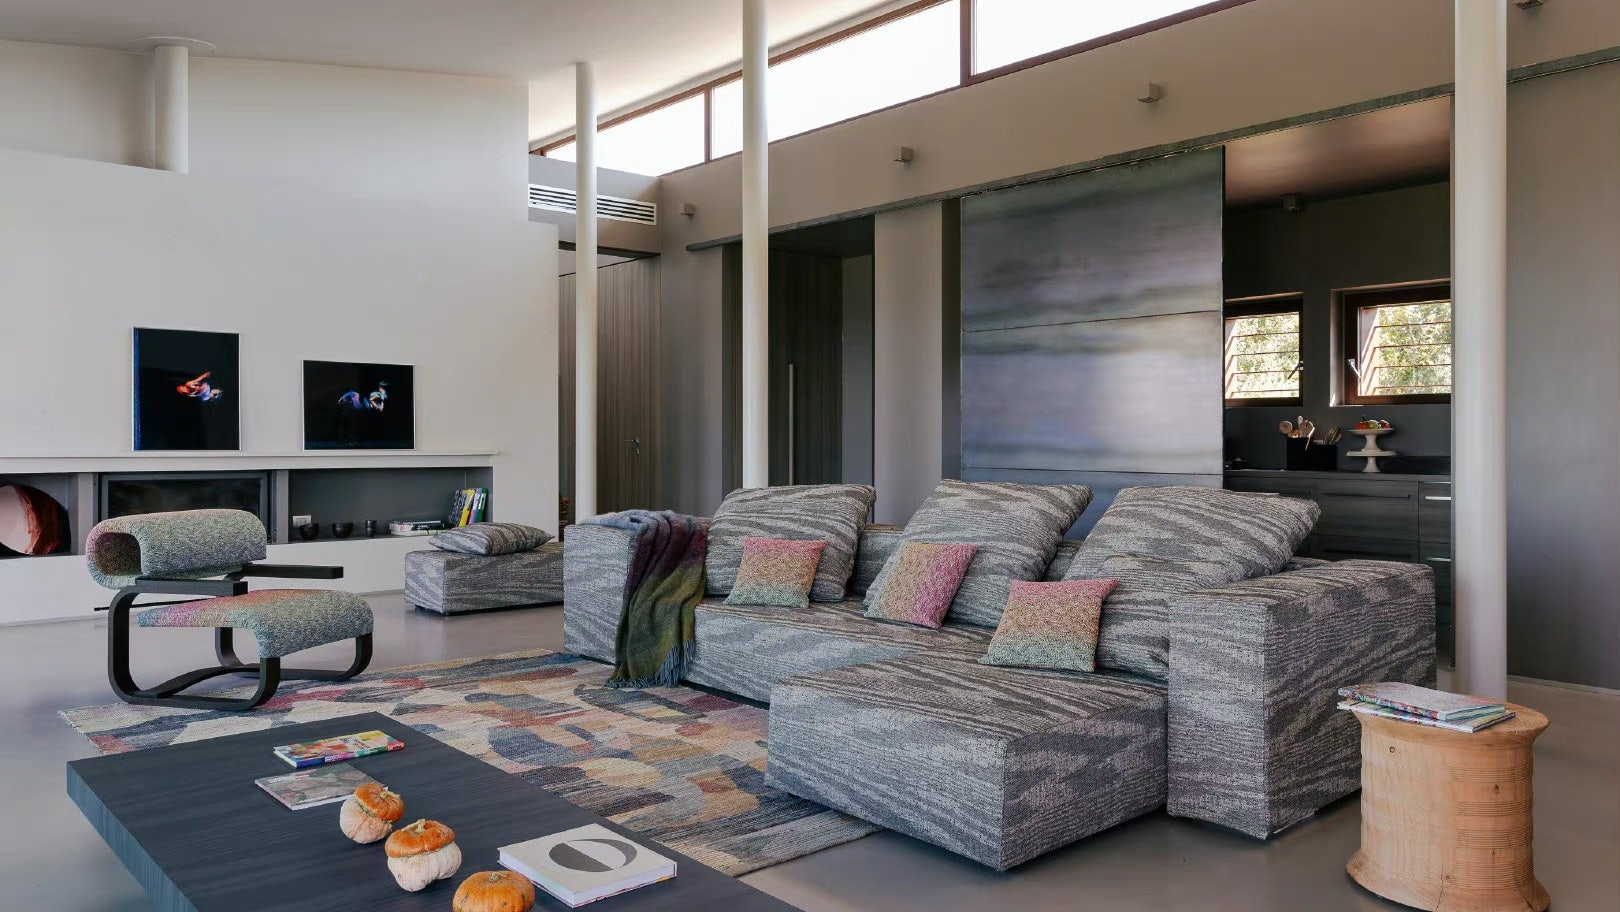 Many Chinese tenants are transforming their living spaces into dream homes through DIY apartment renovations — with a fashion-and-function consumer mindset. Photo: Missoni